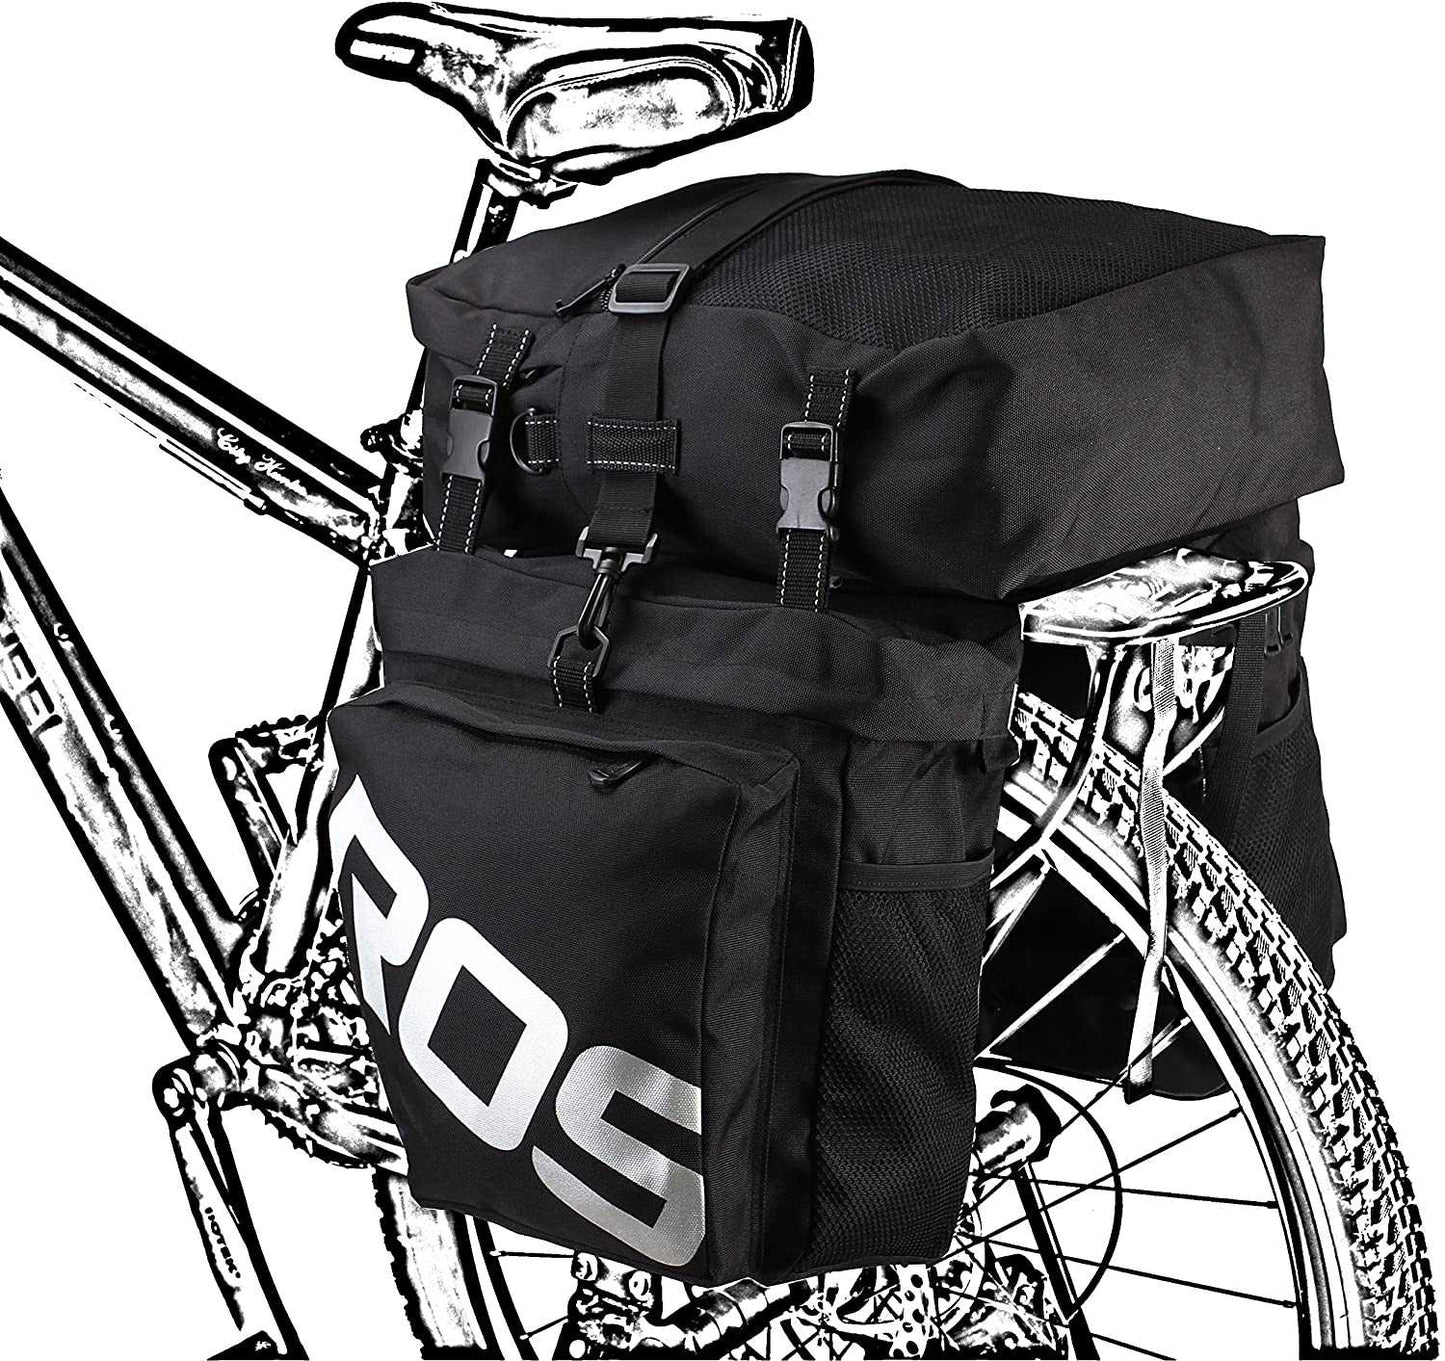 Roswheel 3 in 1 Expedition Touring Cam Pannier